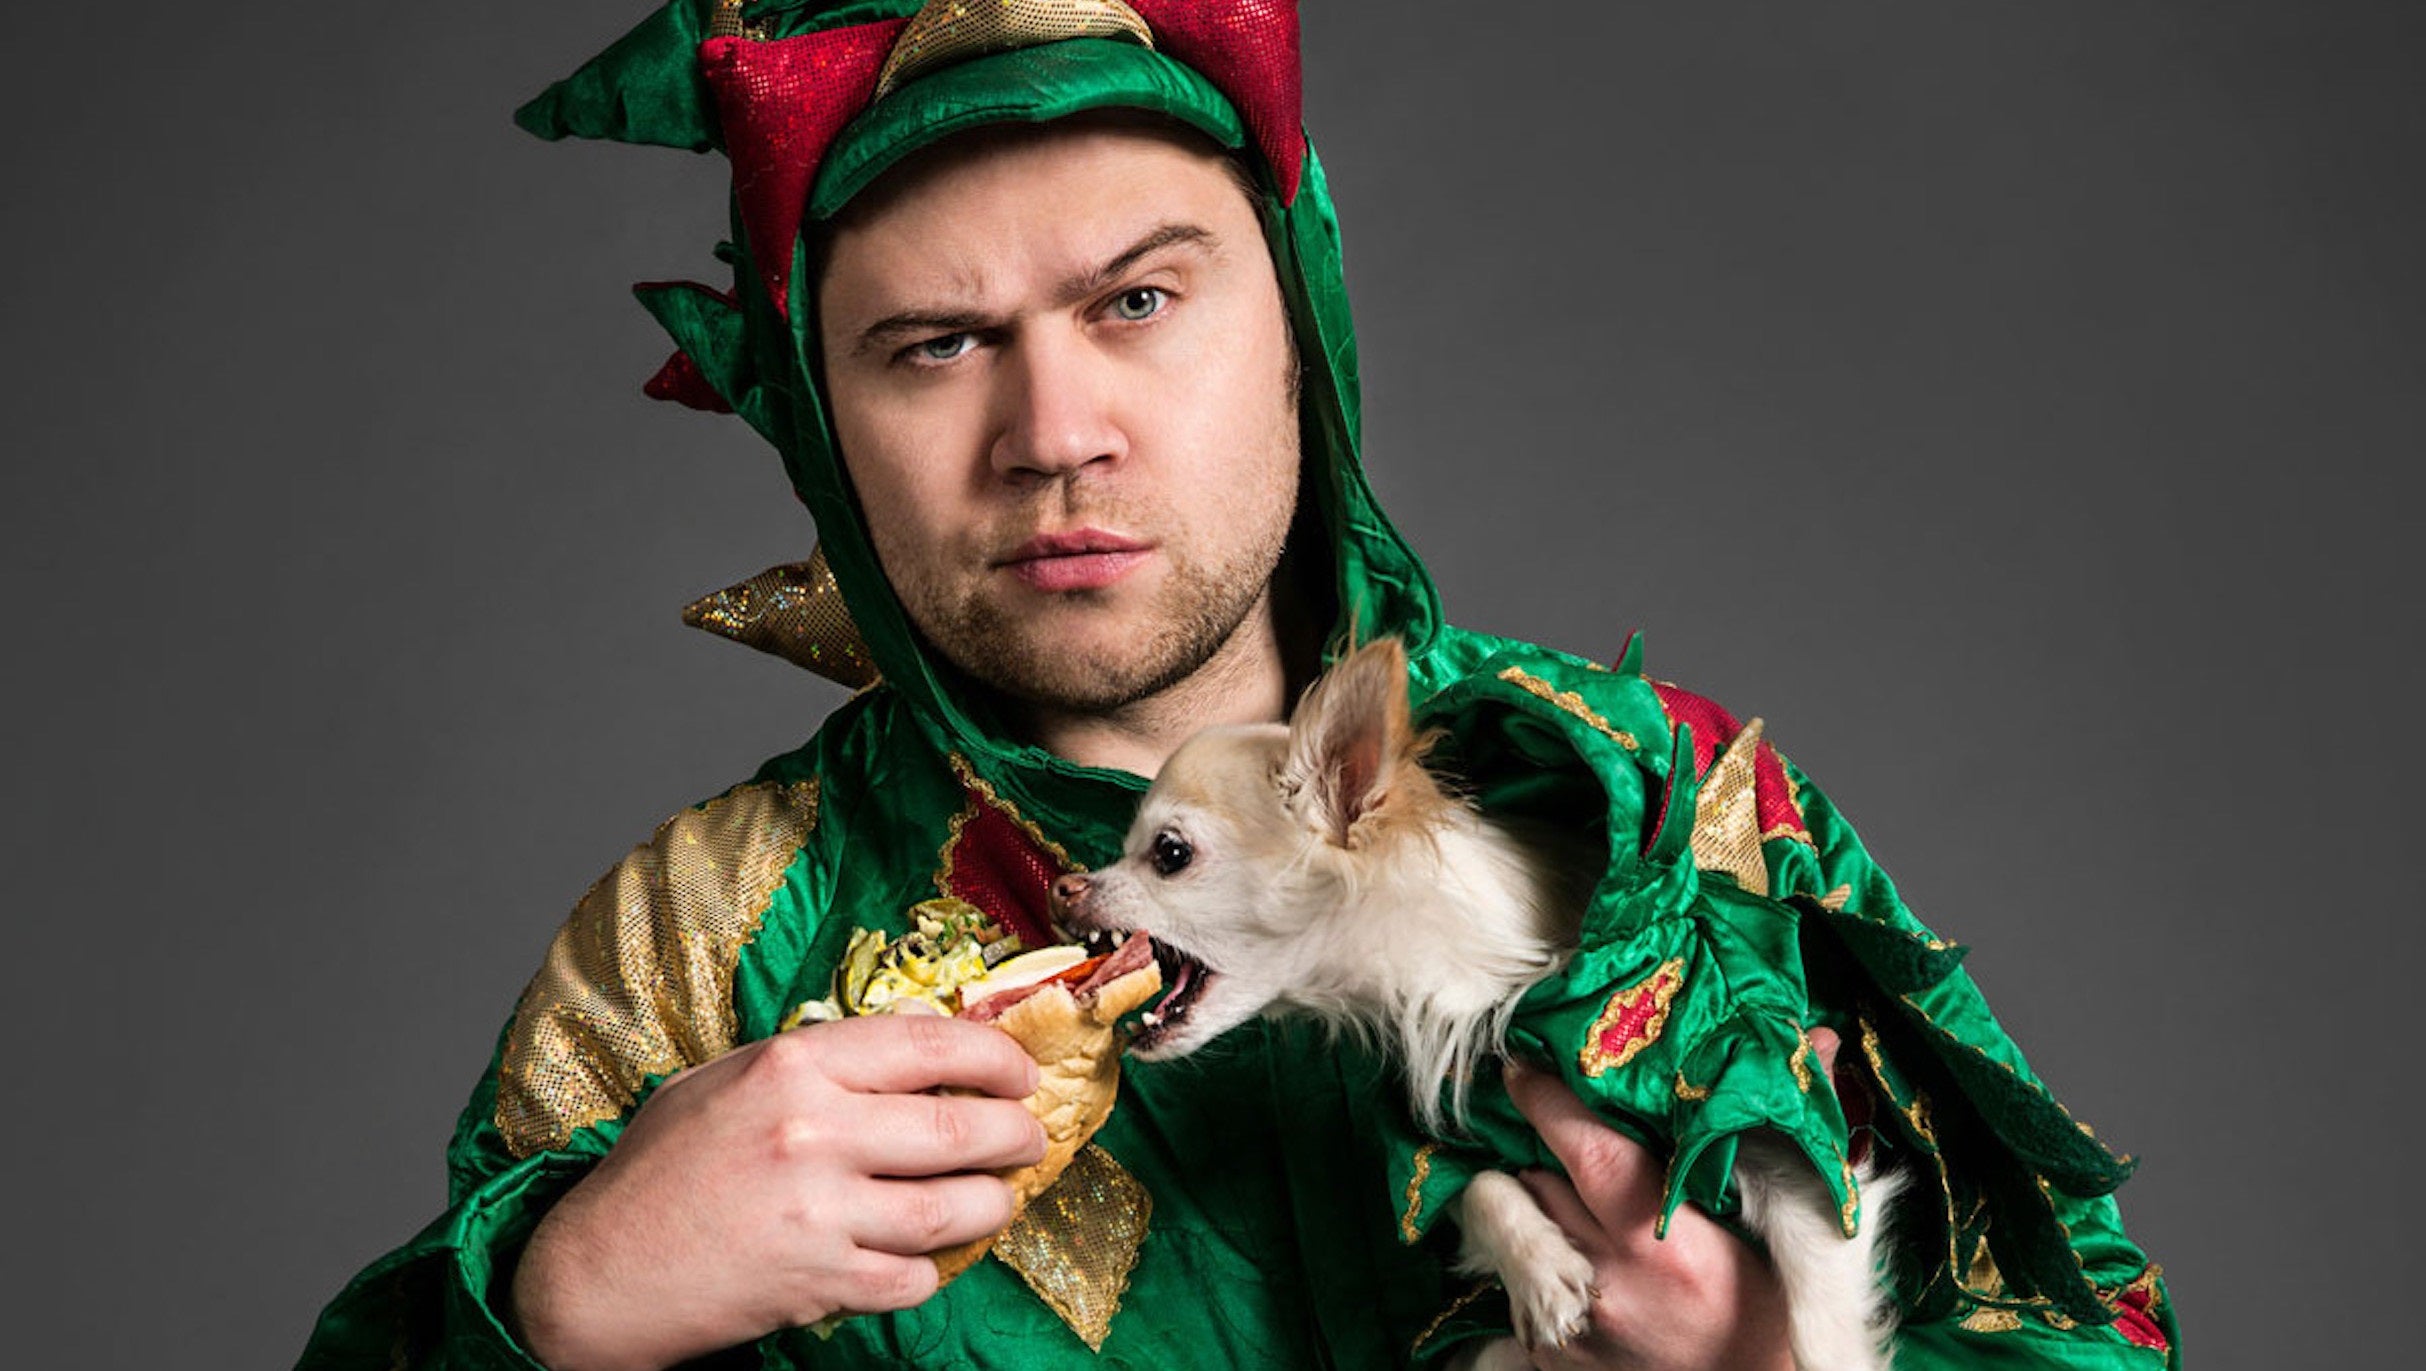 Piff the Magic Dragon in Niagara Falls promo photo for Official Platinum Onsale presale offer code